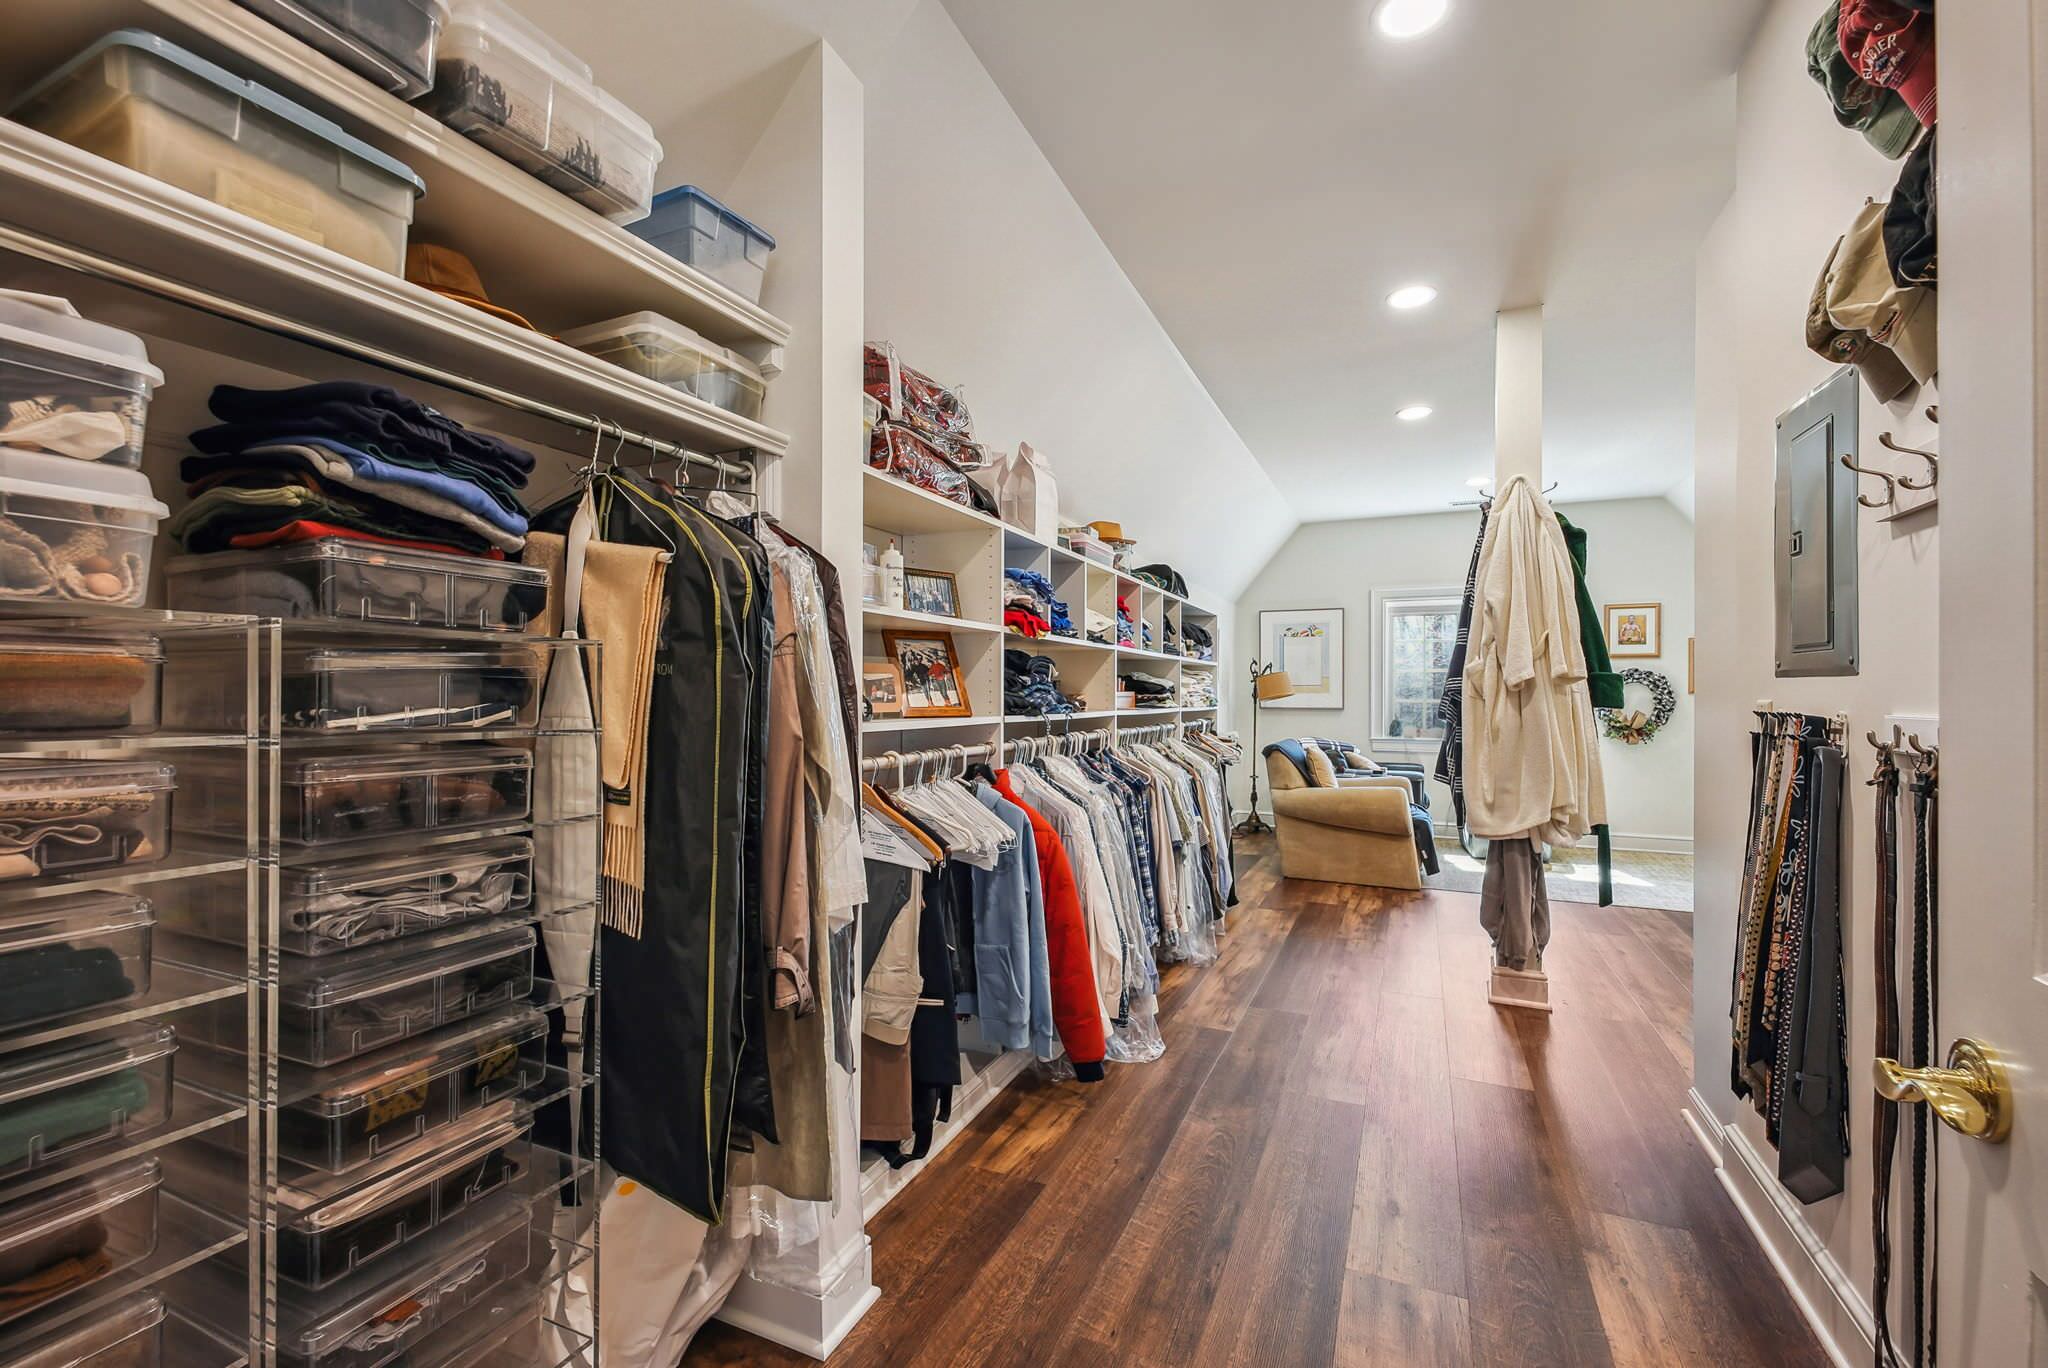 Luxurious Walk-In Closet Design - Country Club Builders & Remodelers